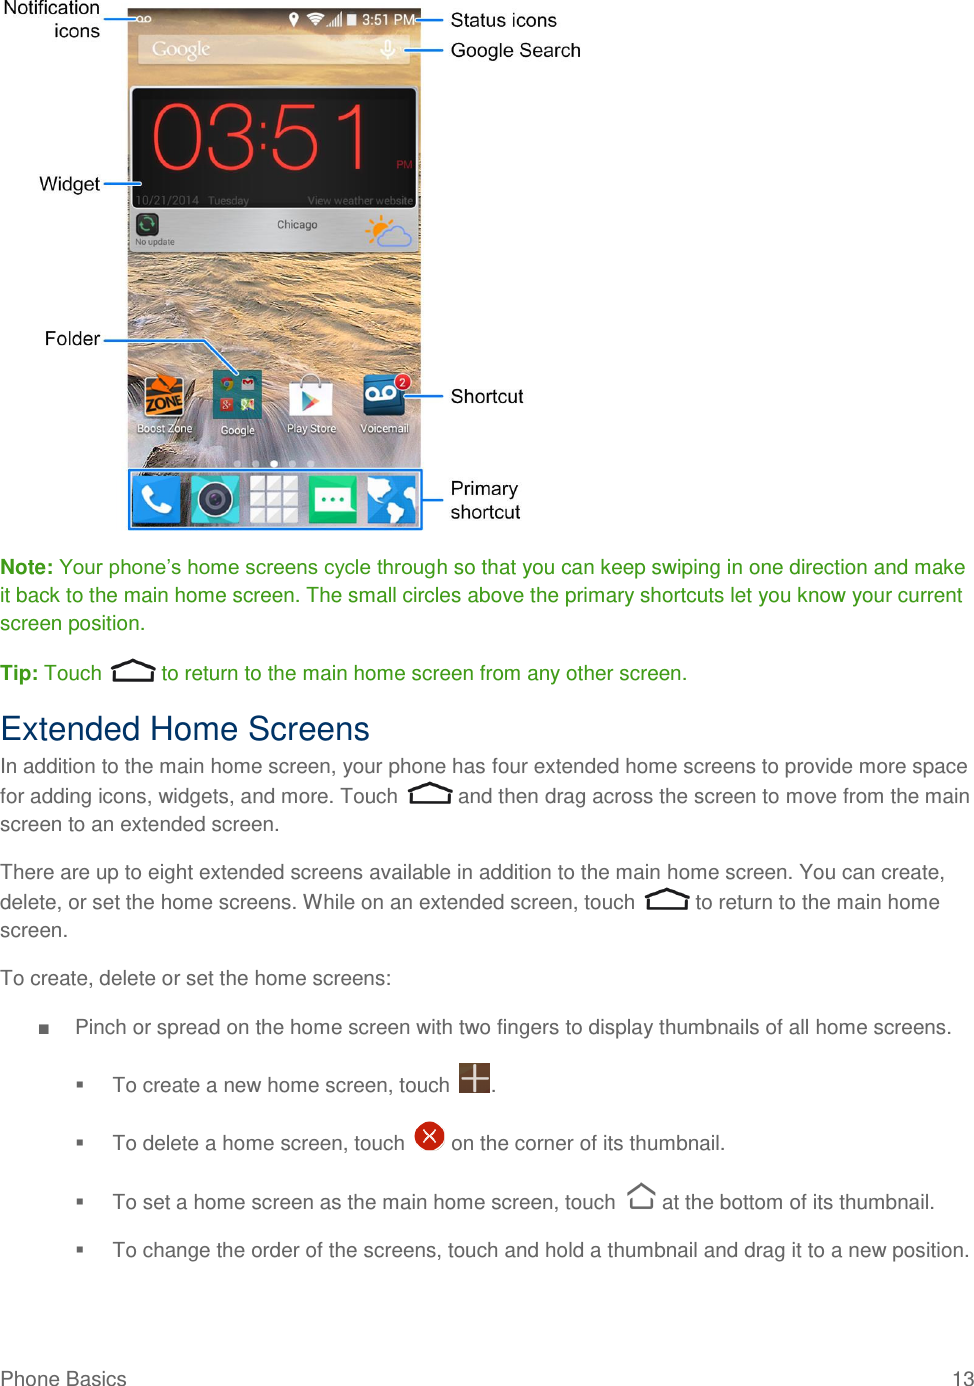 Phone Basics  13   Note: Your phone’s home screens cycle through so that you can keep swiping in one direction and make it back to the main home screen. The small circles above the primary shortcuts let you know your current screen position. Tip: Touch   to return to the main home screen from any other screen.  Extended Home Screens In addition to the main home screen, your phone has four extended home screens to provide more space for adding icons, widgets, and more. Touch   and then drag across the screen to move from the main screen to an extended screen. There are up to eight extended screens available in addition to the main home screen. You can create, delete, or set the home screens. While on an extended screen, touch   to return to the main home screen. To create, delete or set the home screens: ■  Pinch or spread on the home screen with two fingers to display thumbnails of all home screens.   To create a new home screen, touch  .   To delete a home screen, touch   on the corner of its thumbnail.   To set a home screen as the main home screen, touch   at the bottom of its thumbnail.   To change the order of the screens, touch and hold a thumbnail and drag it to a new position. 